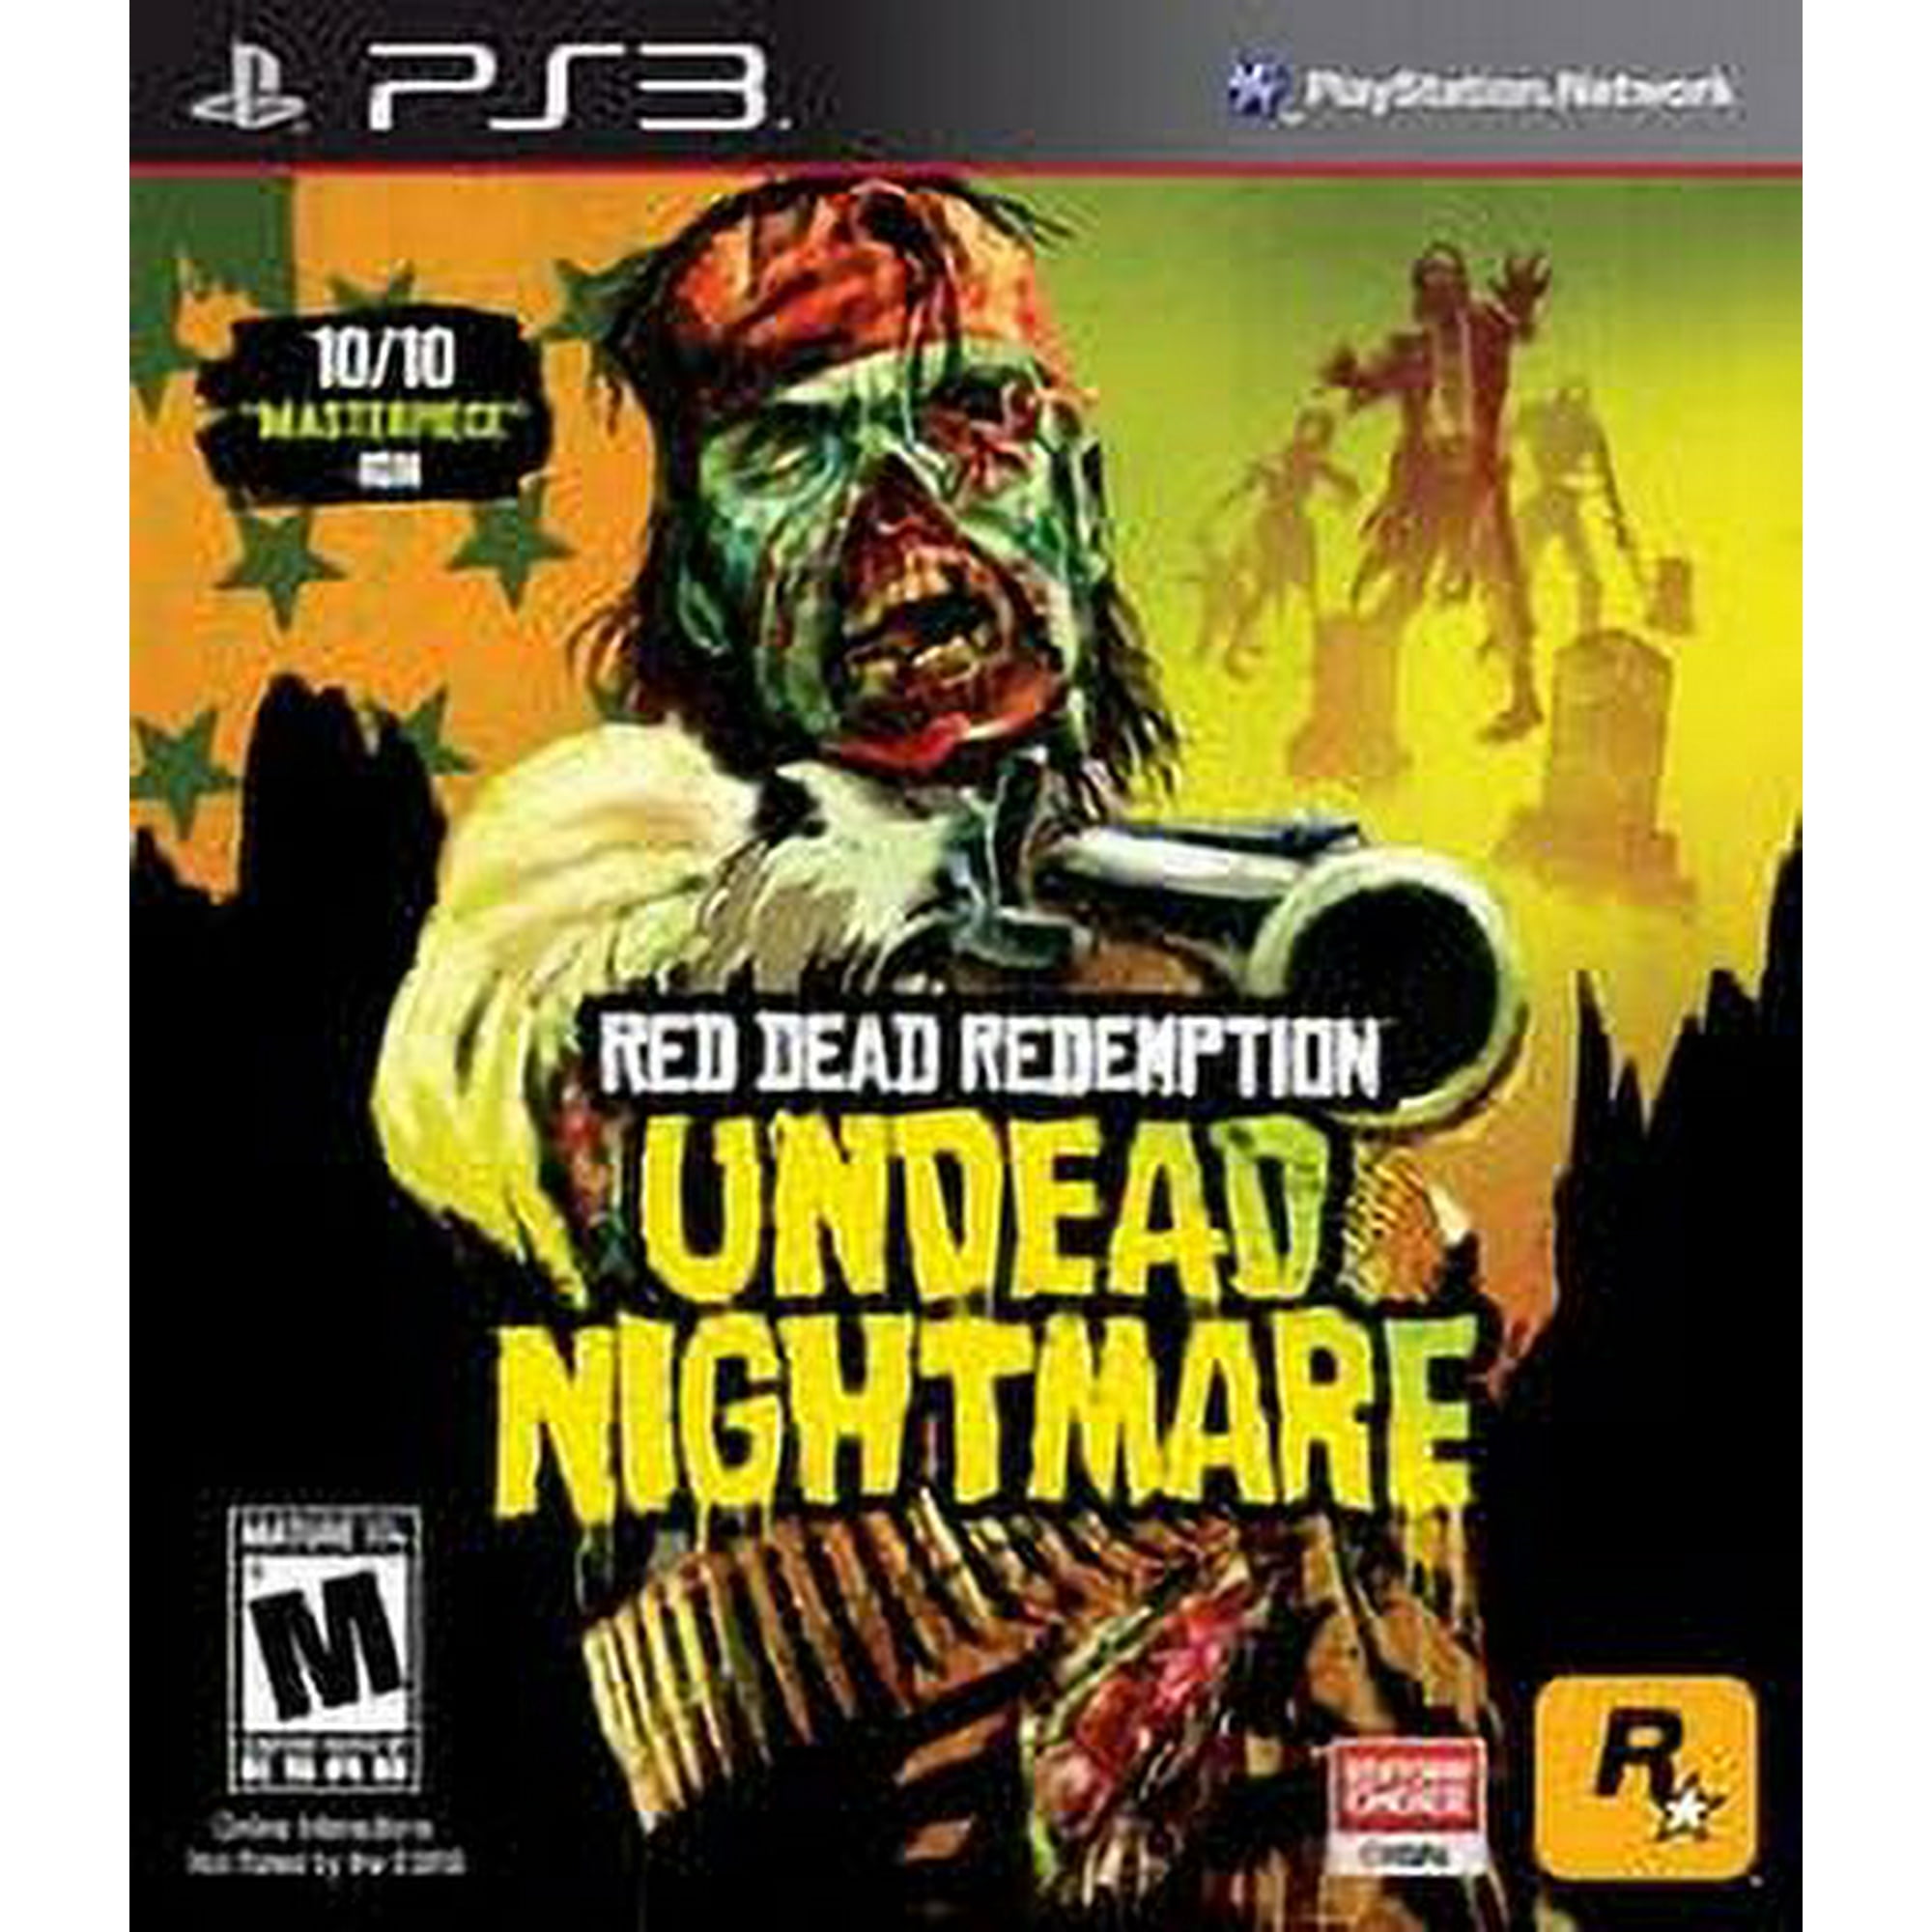 Red Dead Undead Nightmare - Playstation 3 PS3 (Used) 